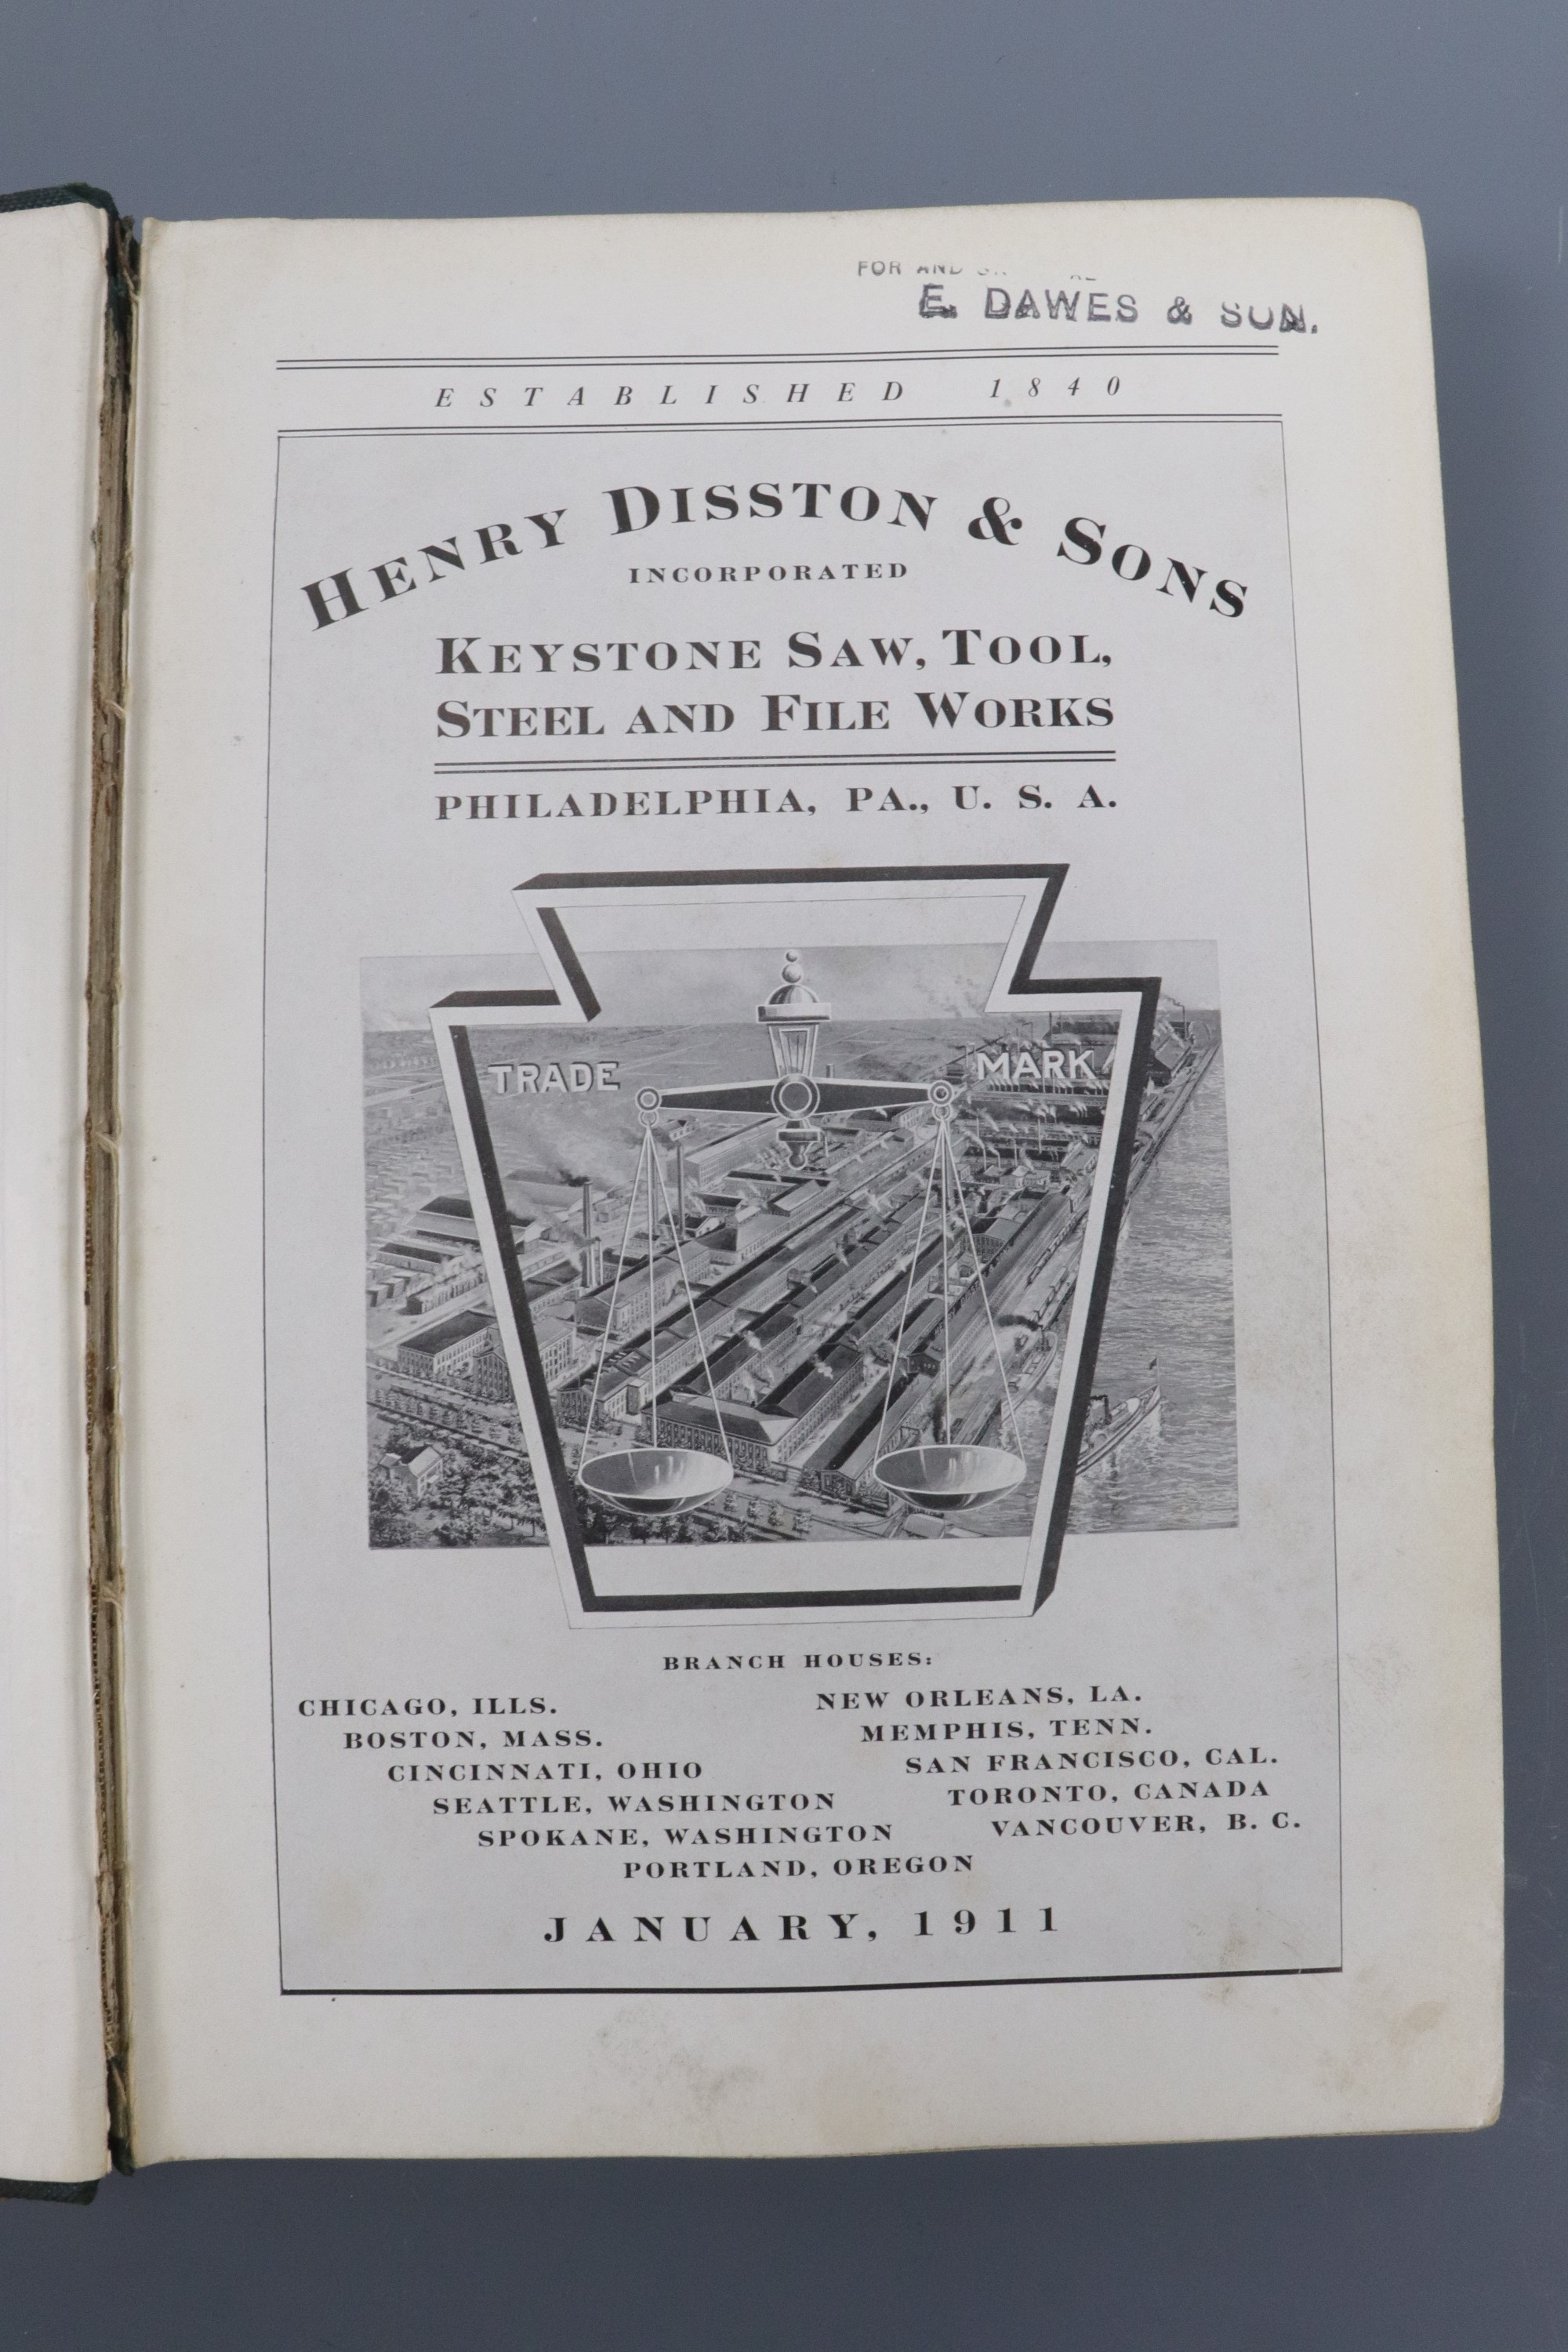 A 1911 tool catalogue of Henry Disston & Sons incorporated, Keystone Saw, Tool, Steel and File - Image 2 of 3